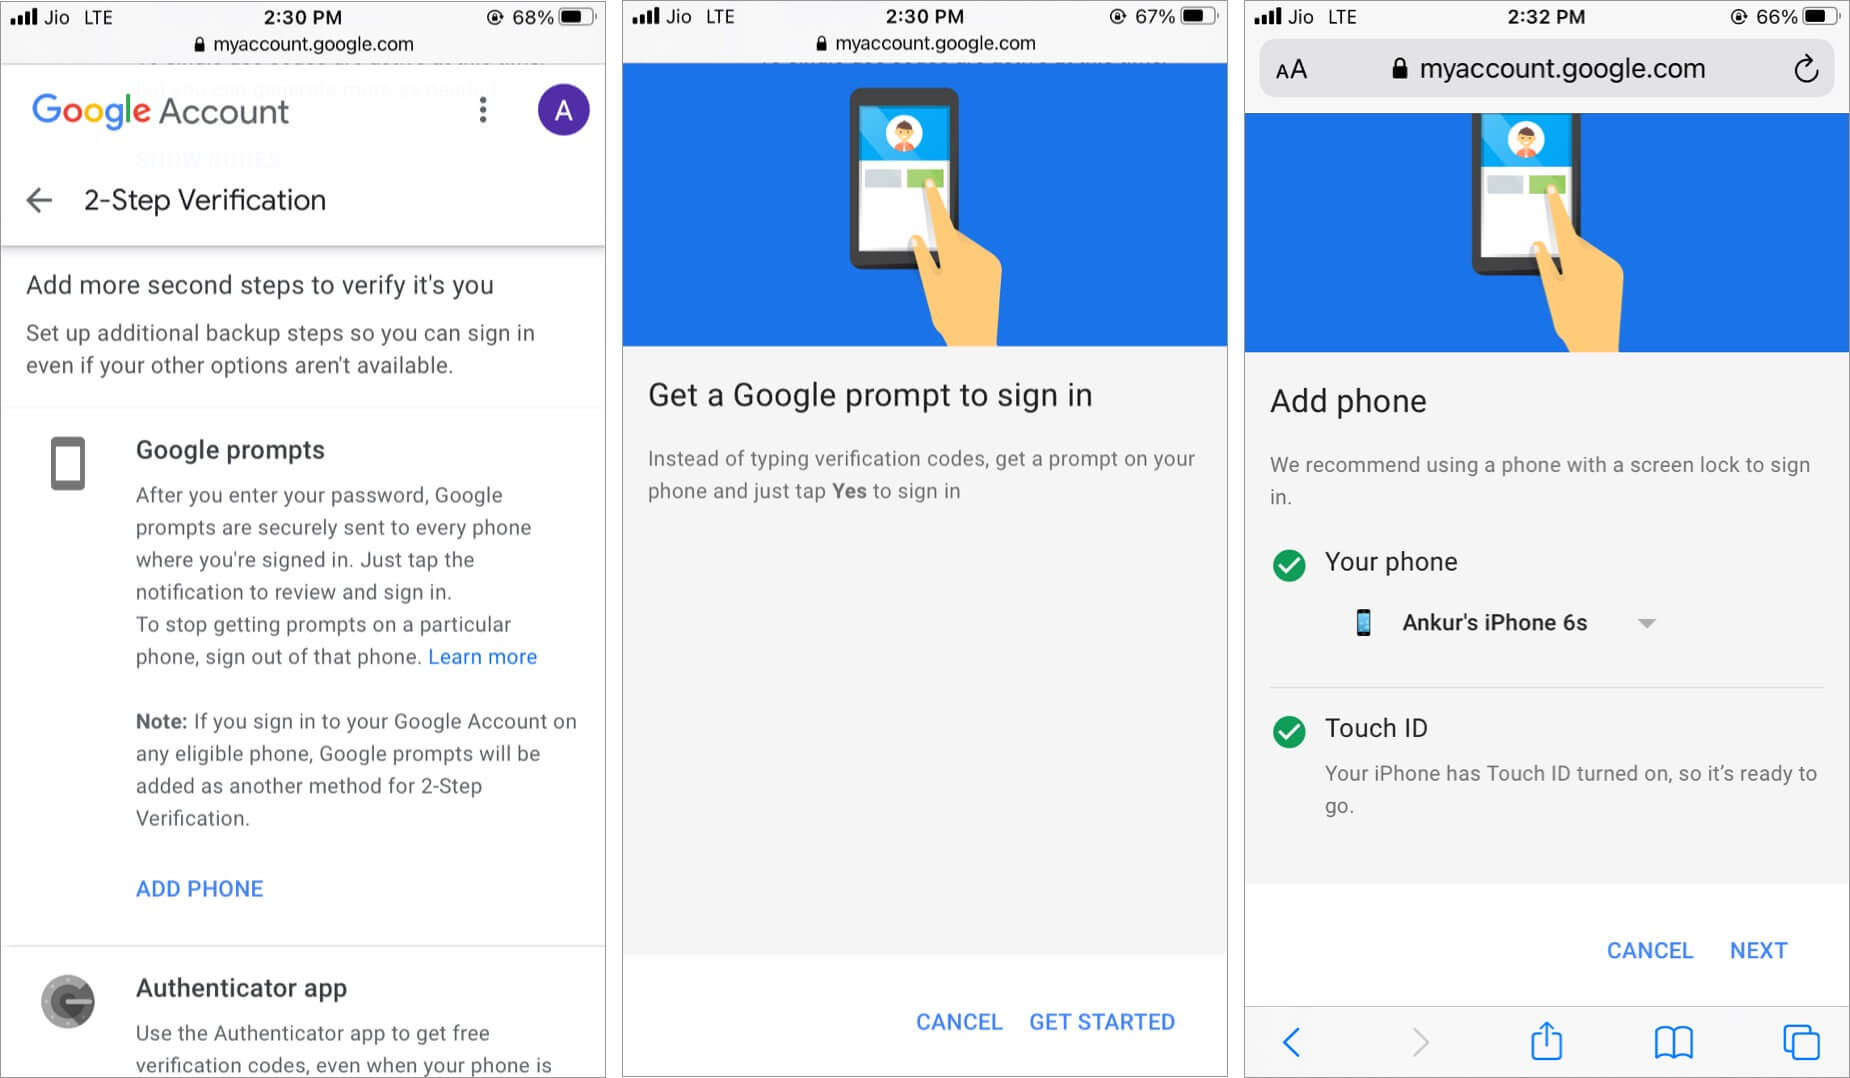 Add Phone to get Google prompts in Gmail or Google app